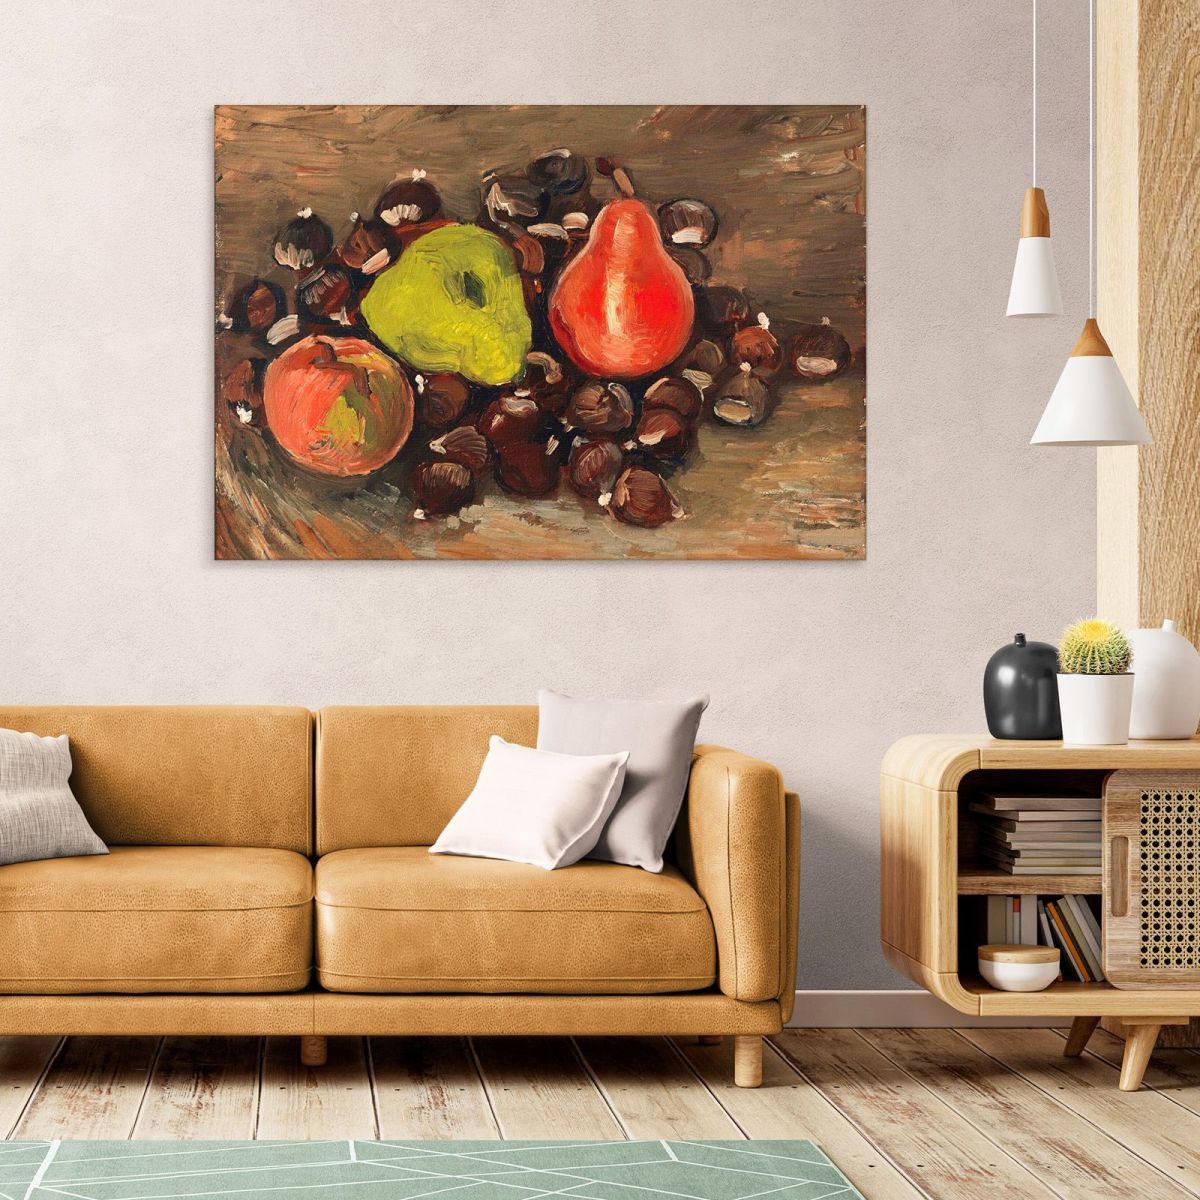 Still Life With Fruit And Chestnuts Van Gogh Vincent canvas print vvg144